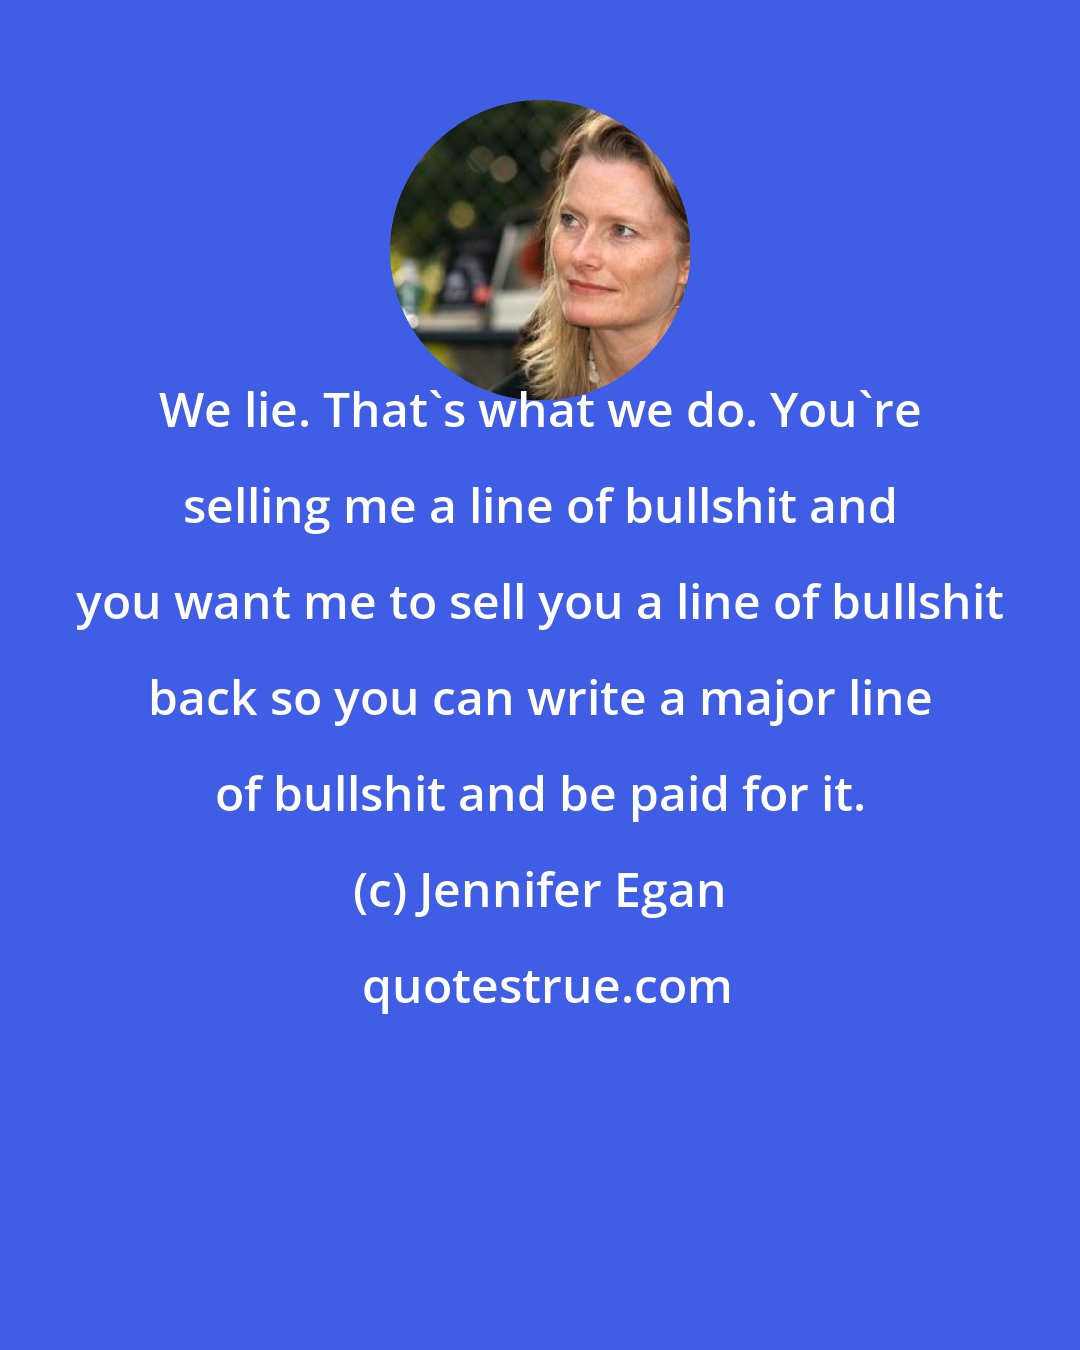 Jennifer Egan: We lie. That's what we do. You're selling me a line of bullshit and you want me to sell you a line of bullshit back so you can write a major line of bullshit and be paid for it.